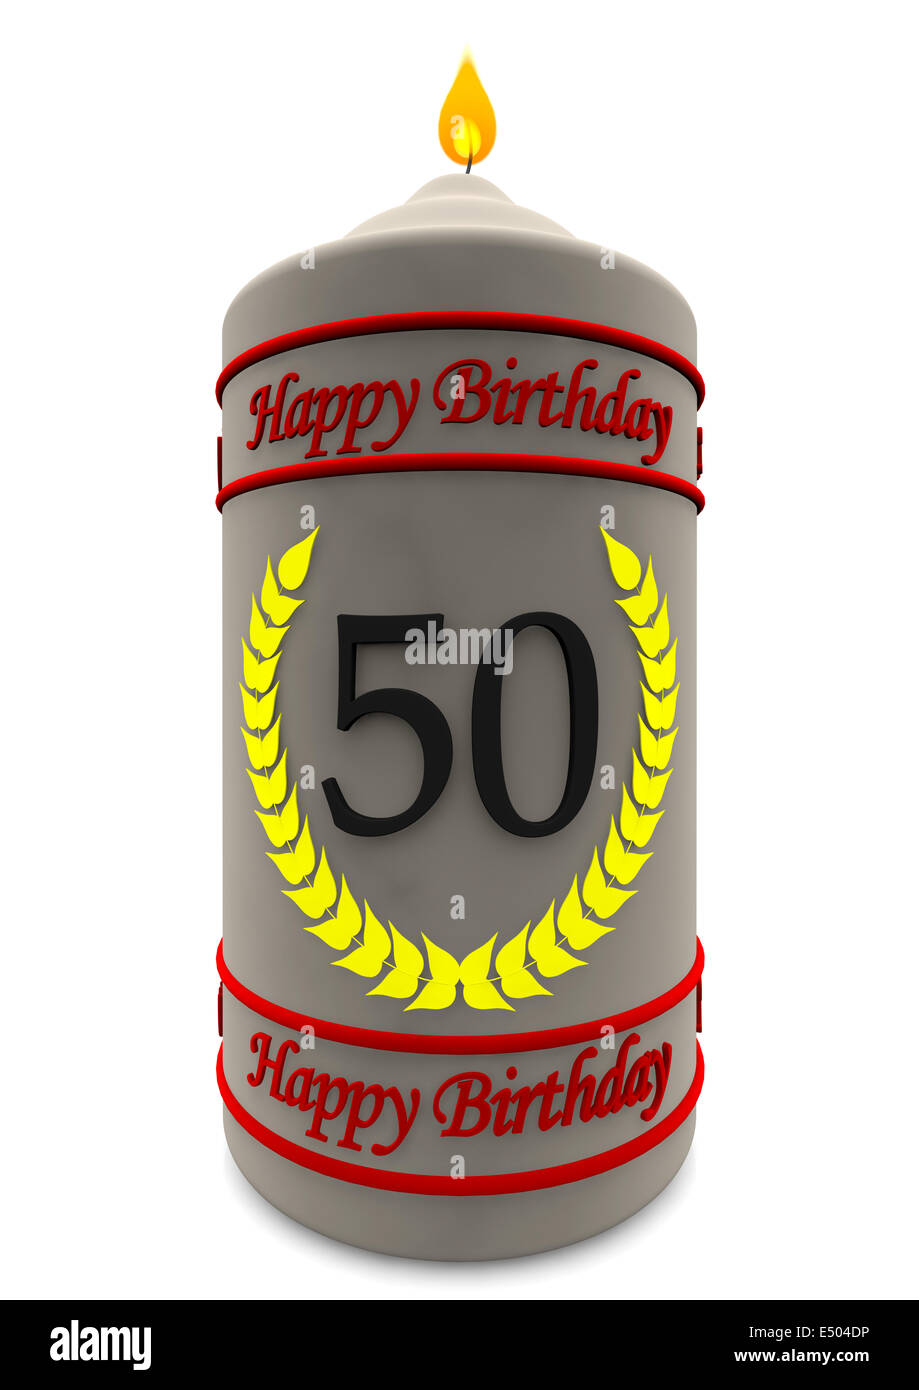 birthday candle for 50th birthday Stock Photo